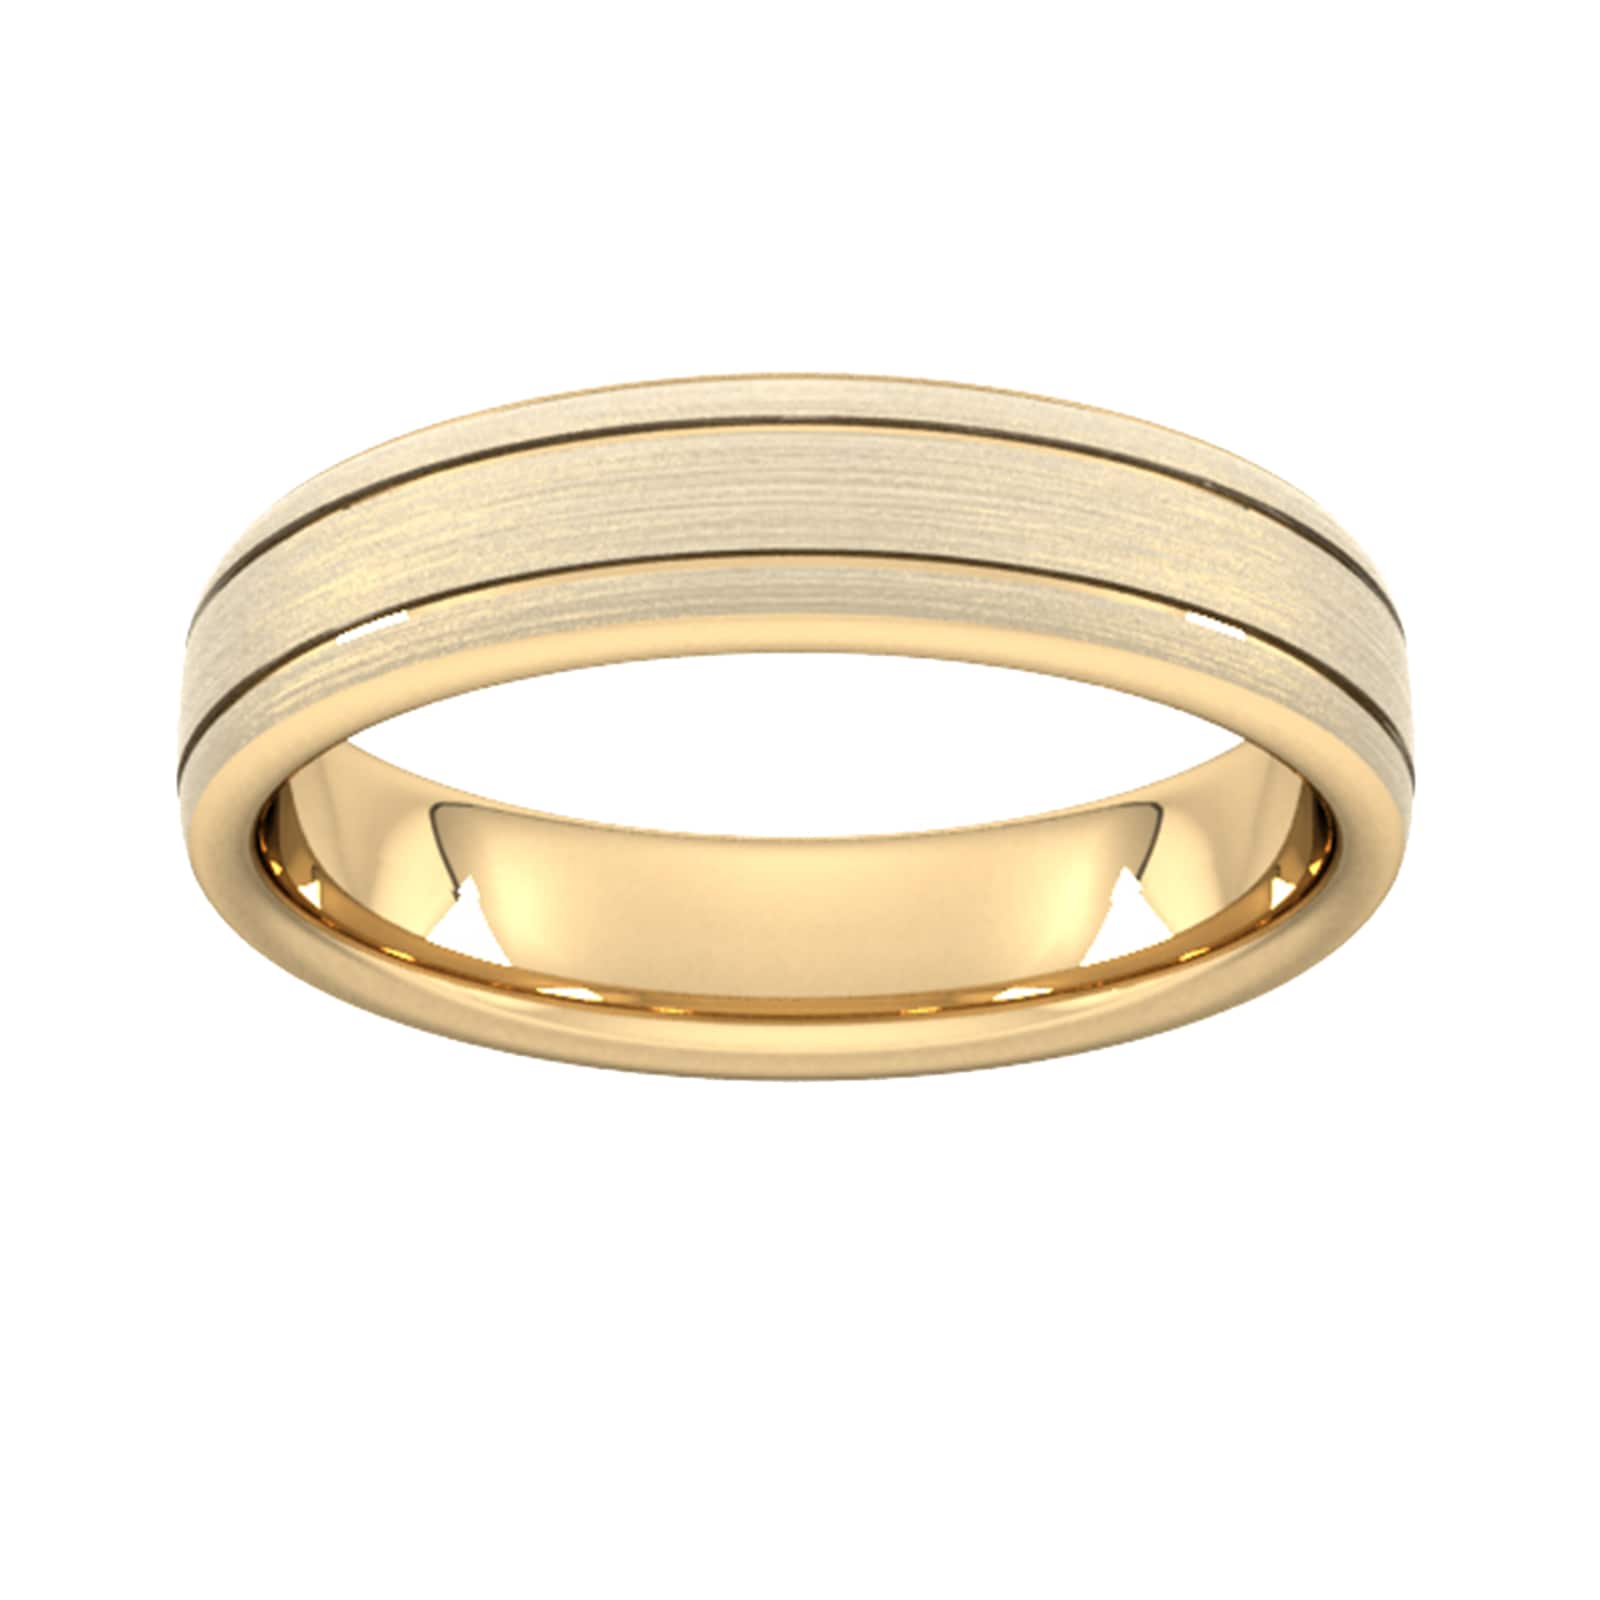 5mm Traditional Court Standard Matt Finish With Double Grooves Wedding Ring In 18 Carat Yellow Gold - Ring Size N